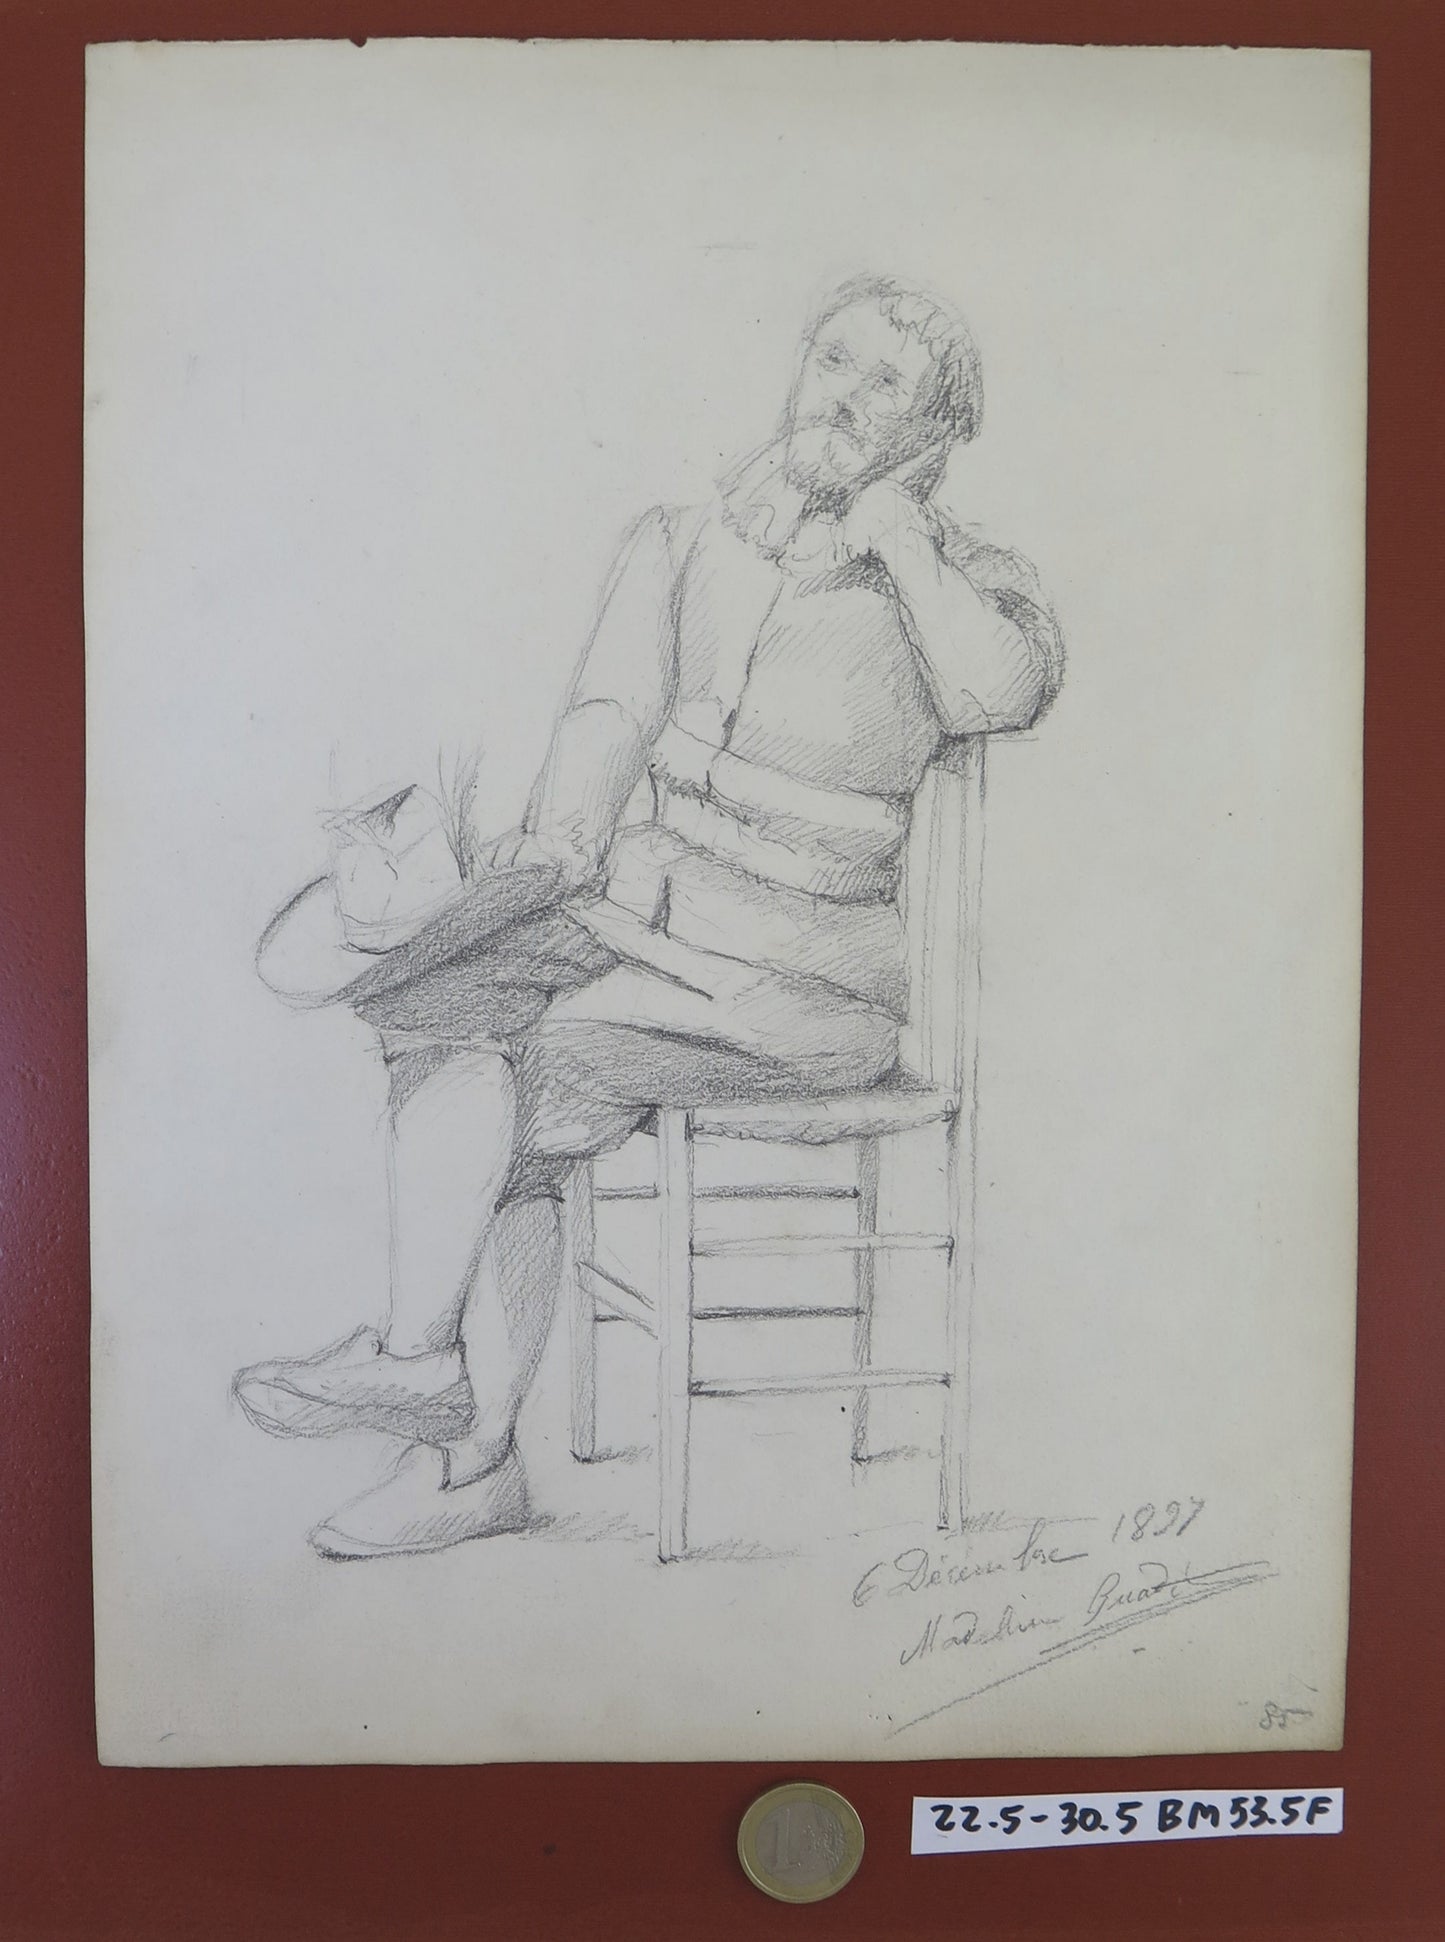 ANTIQUE PORTRAIT DRAWING OF A MAN IN COSTUME SIGNED AND DATED 1897 PENCIL BM53.5F